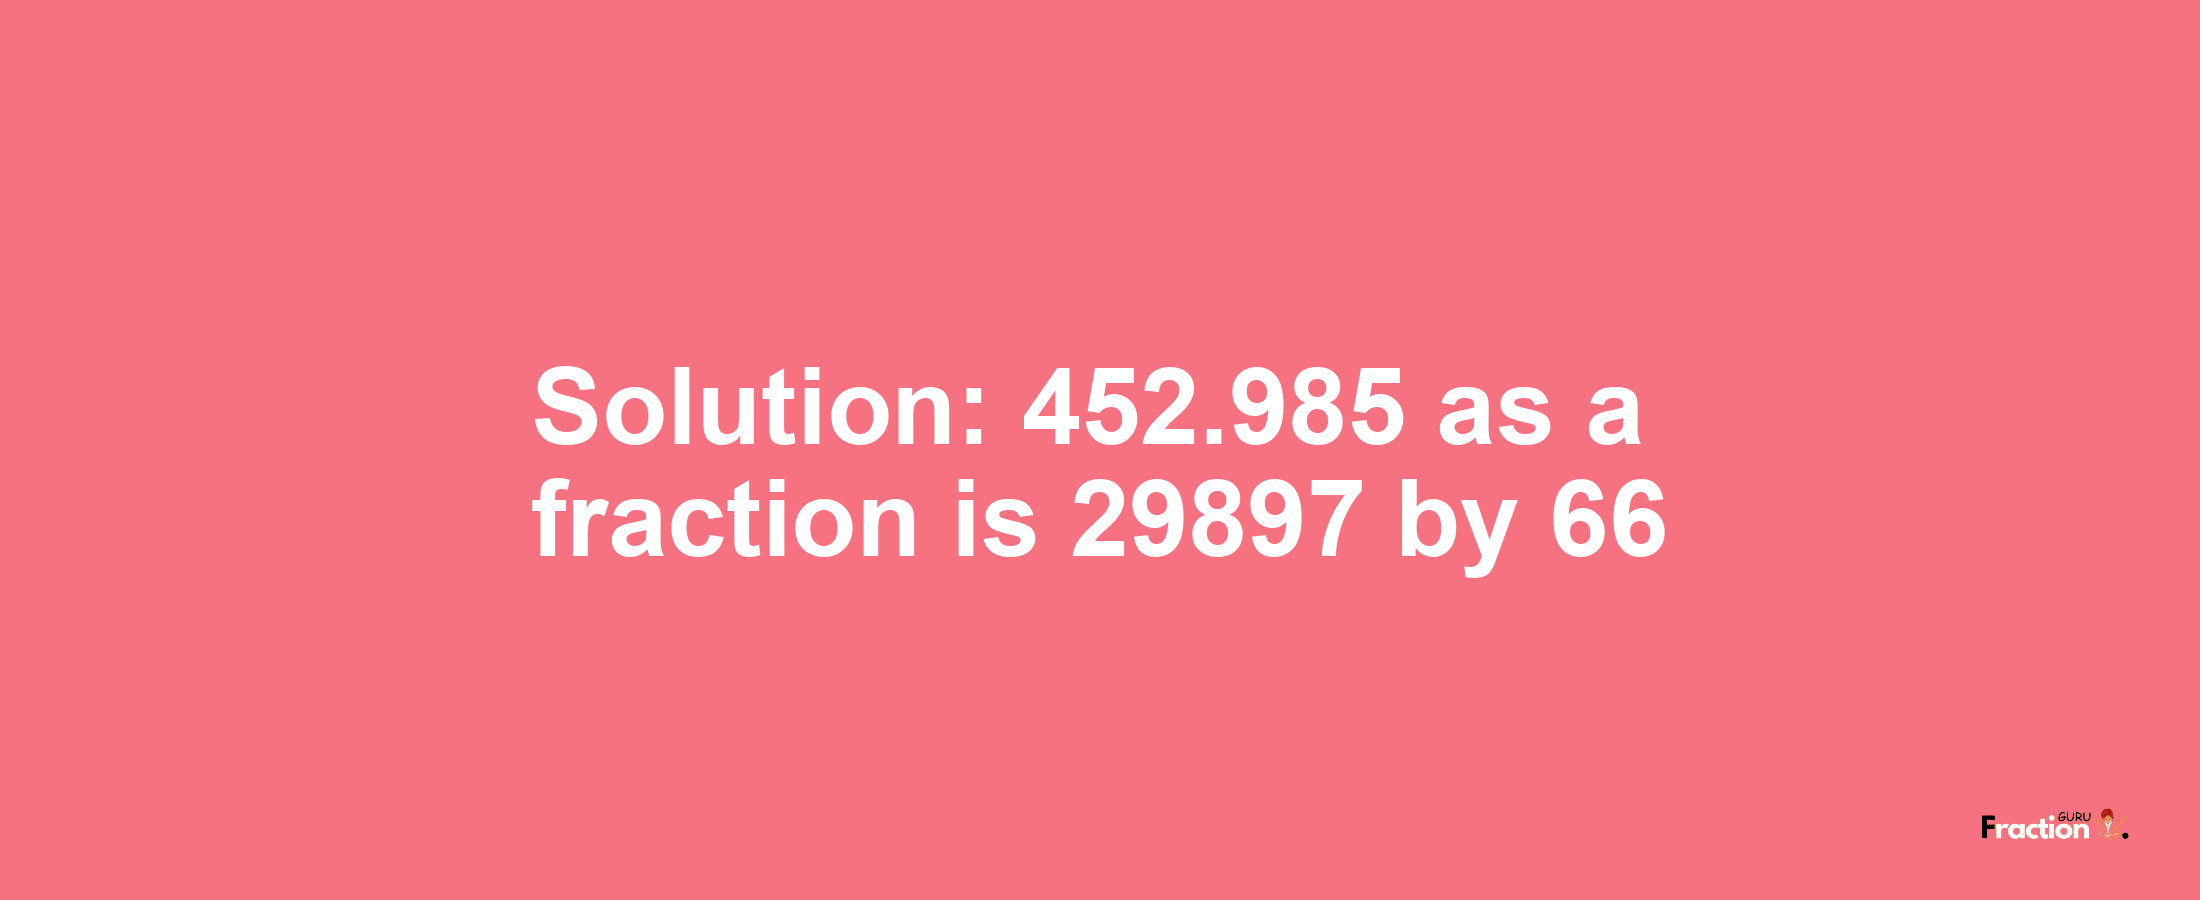 Solution:452.985 as a fraction is 29897/66